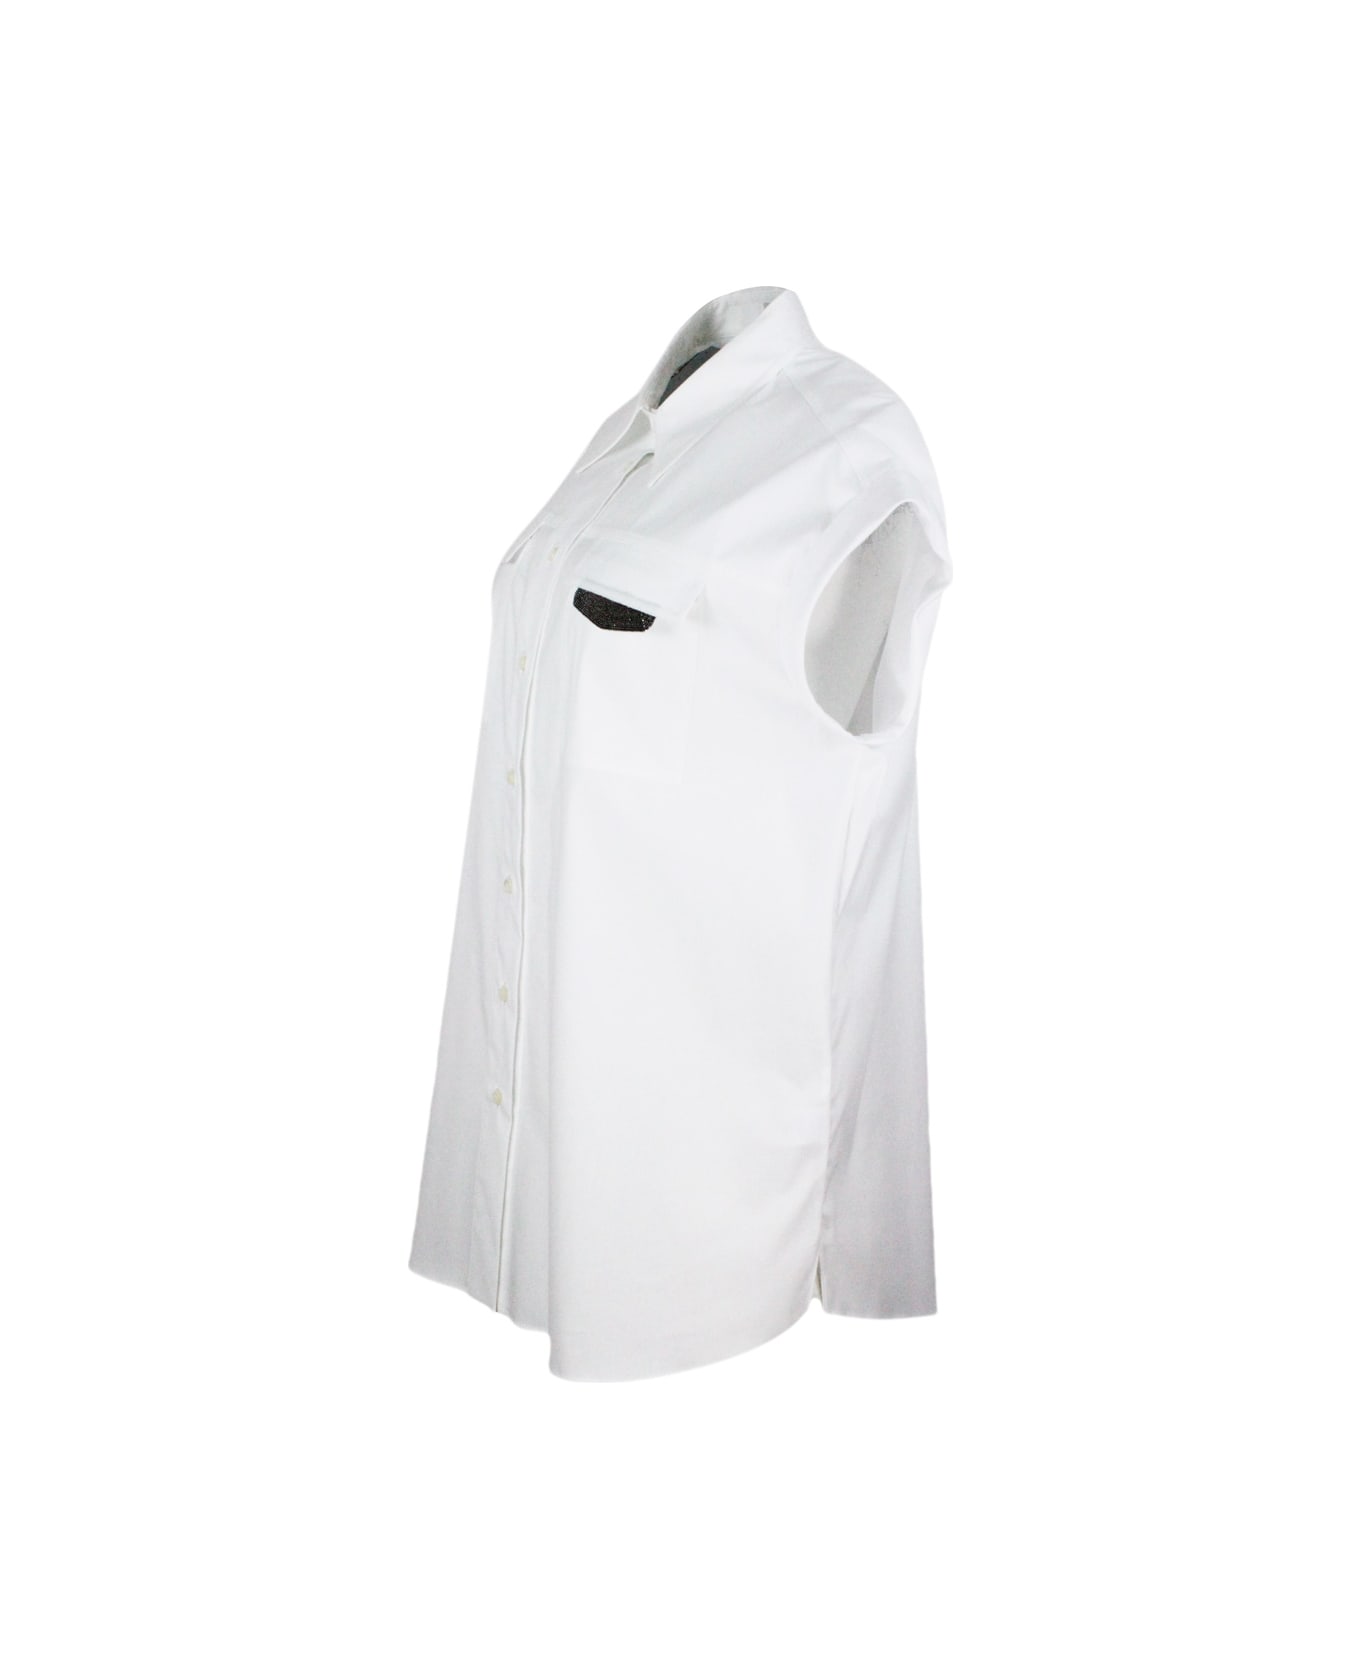 Brunello Cucinelli Sleeveless Shirt With Front Pockets Embellished With Shiny Jewels - White